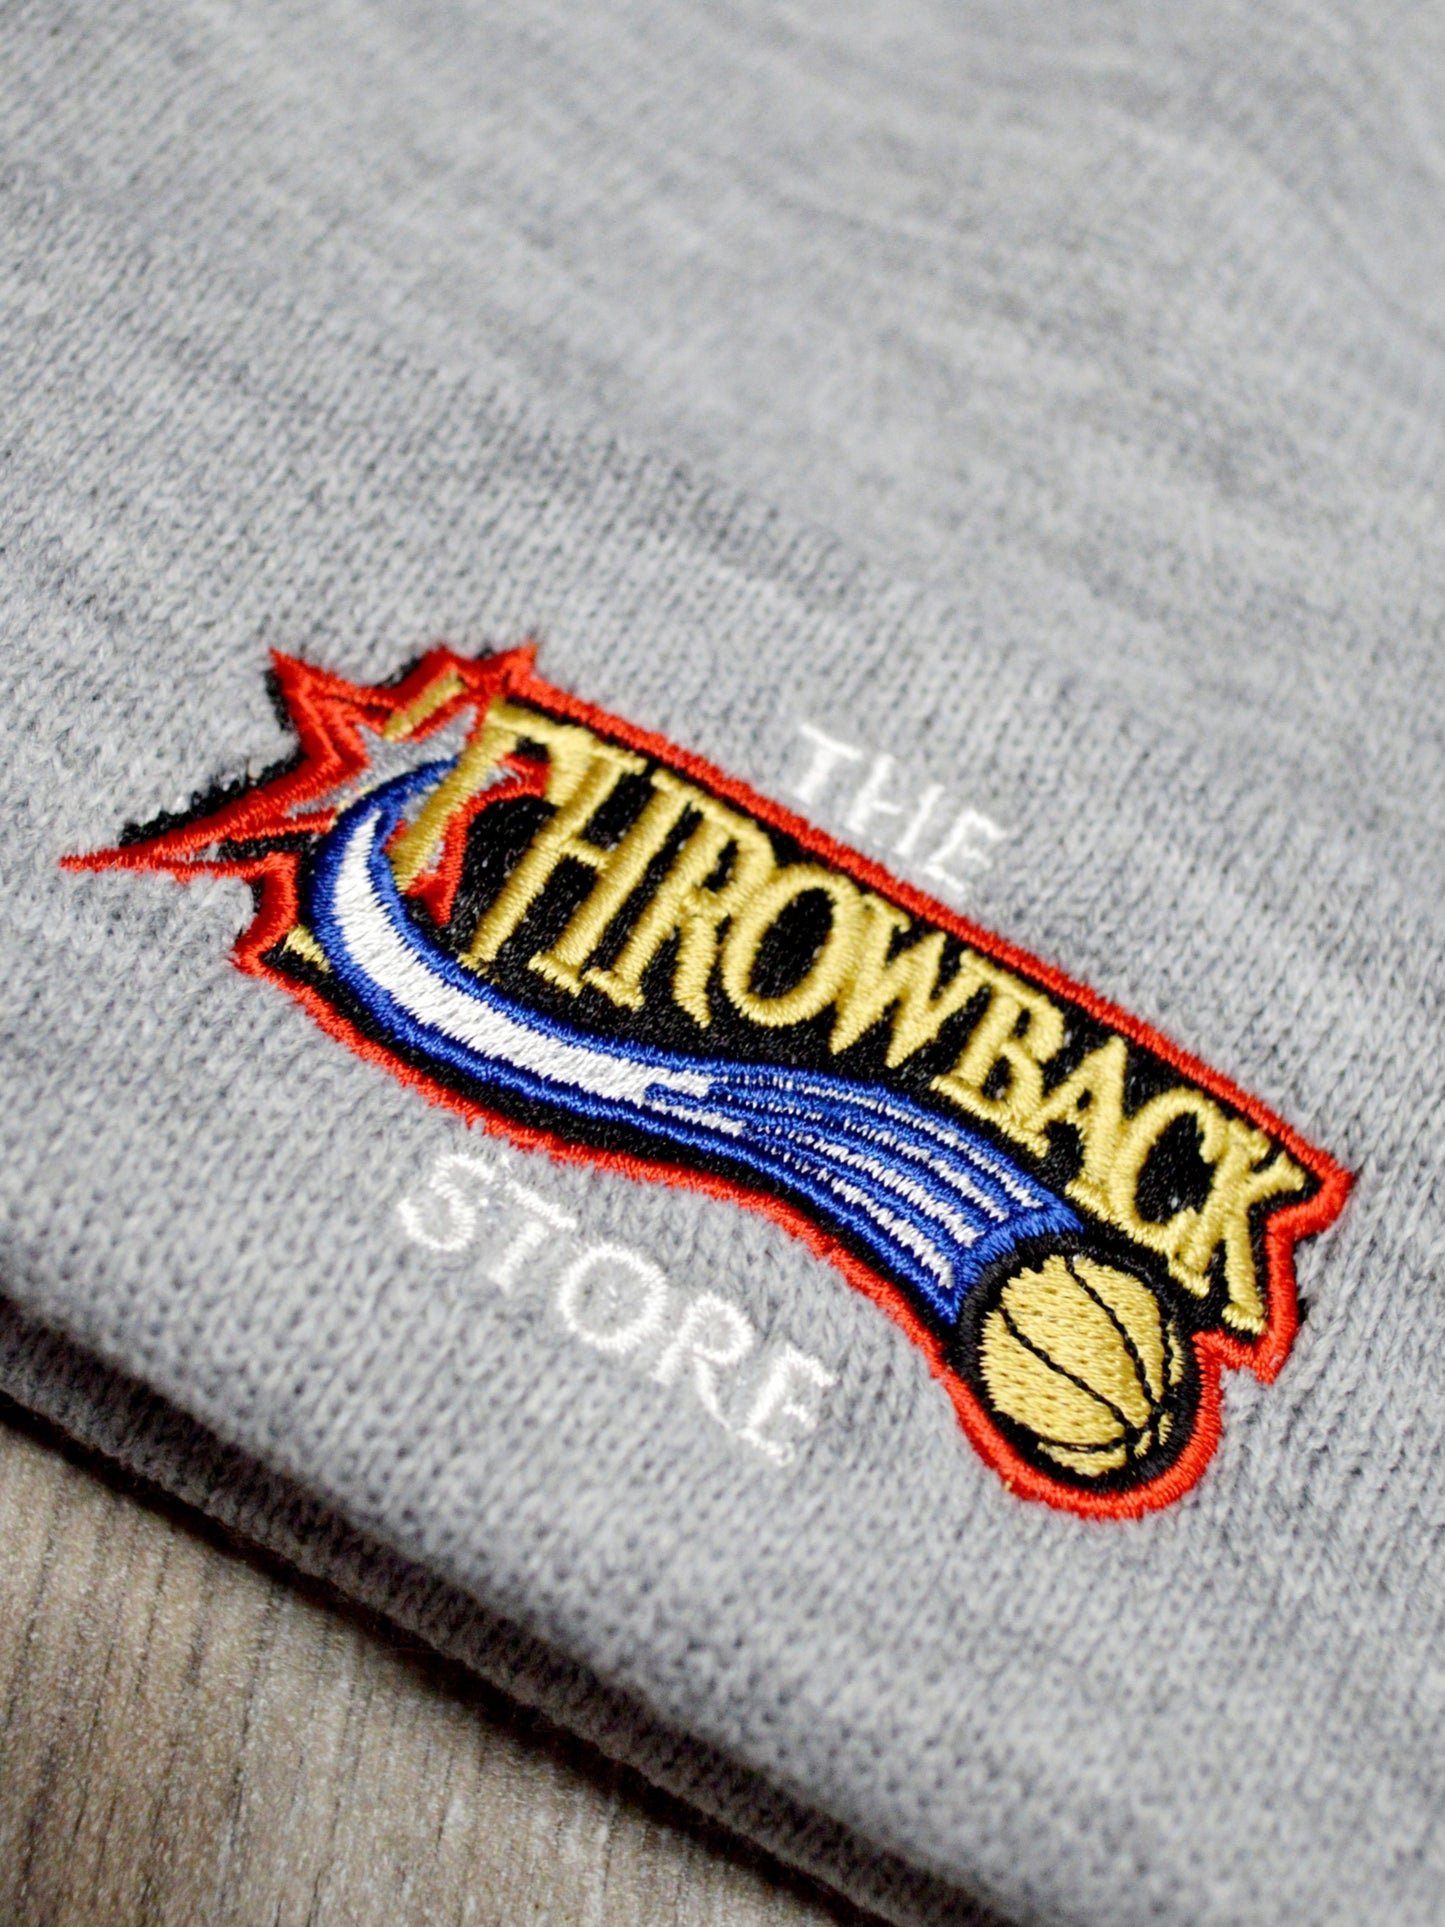 The Throwback Store Beanie Hat